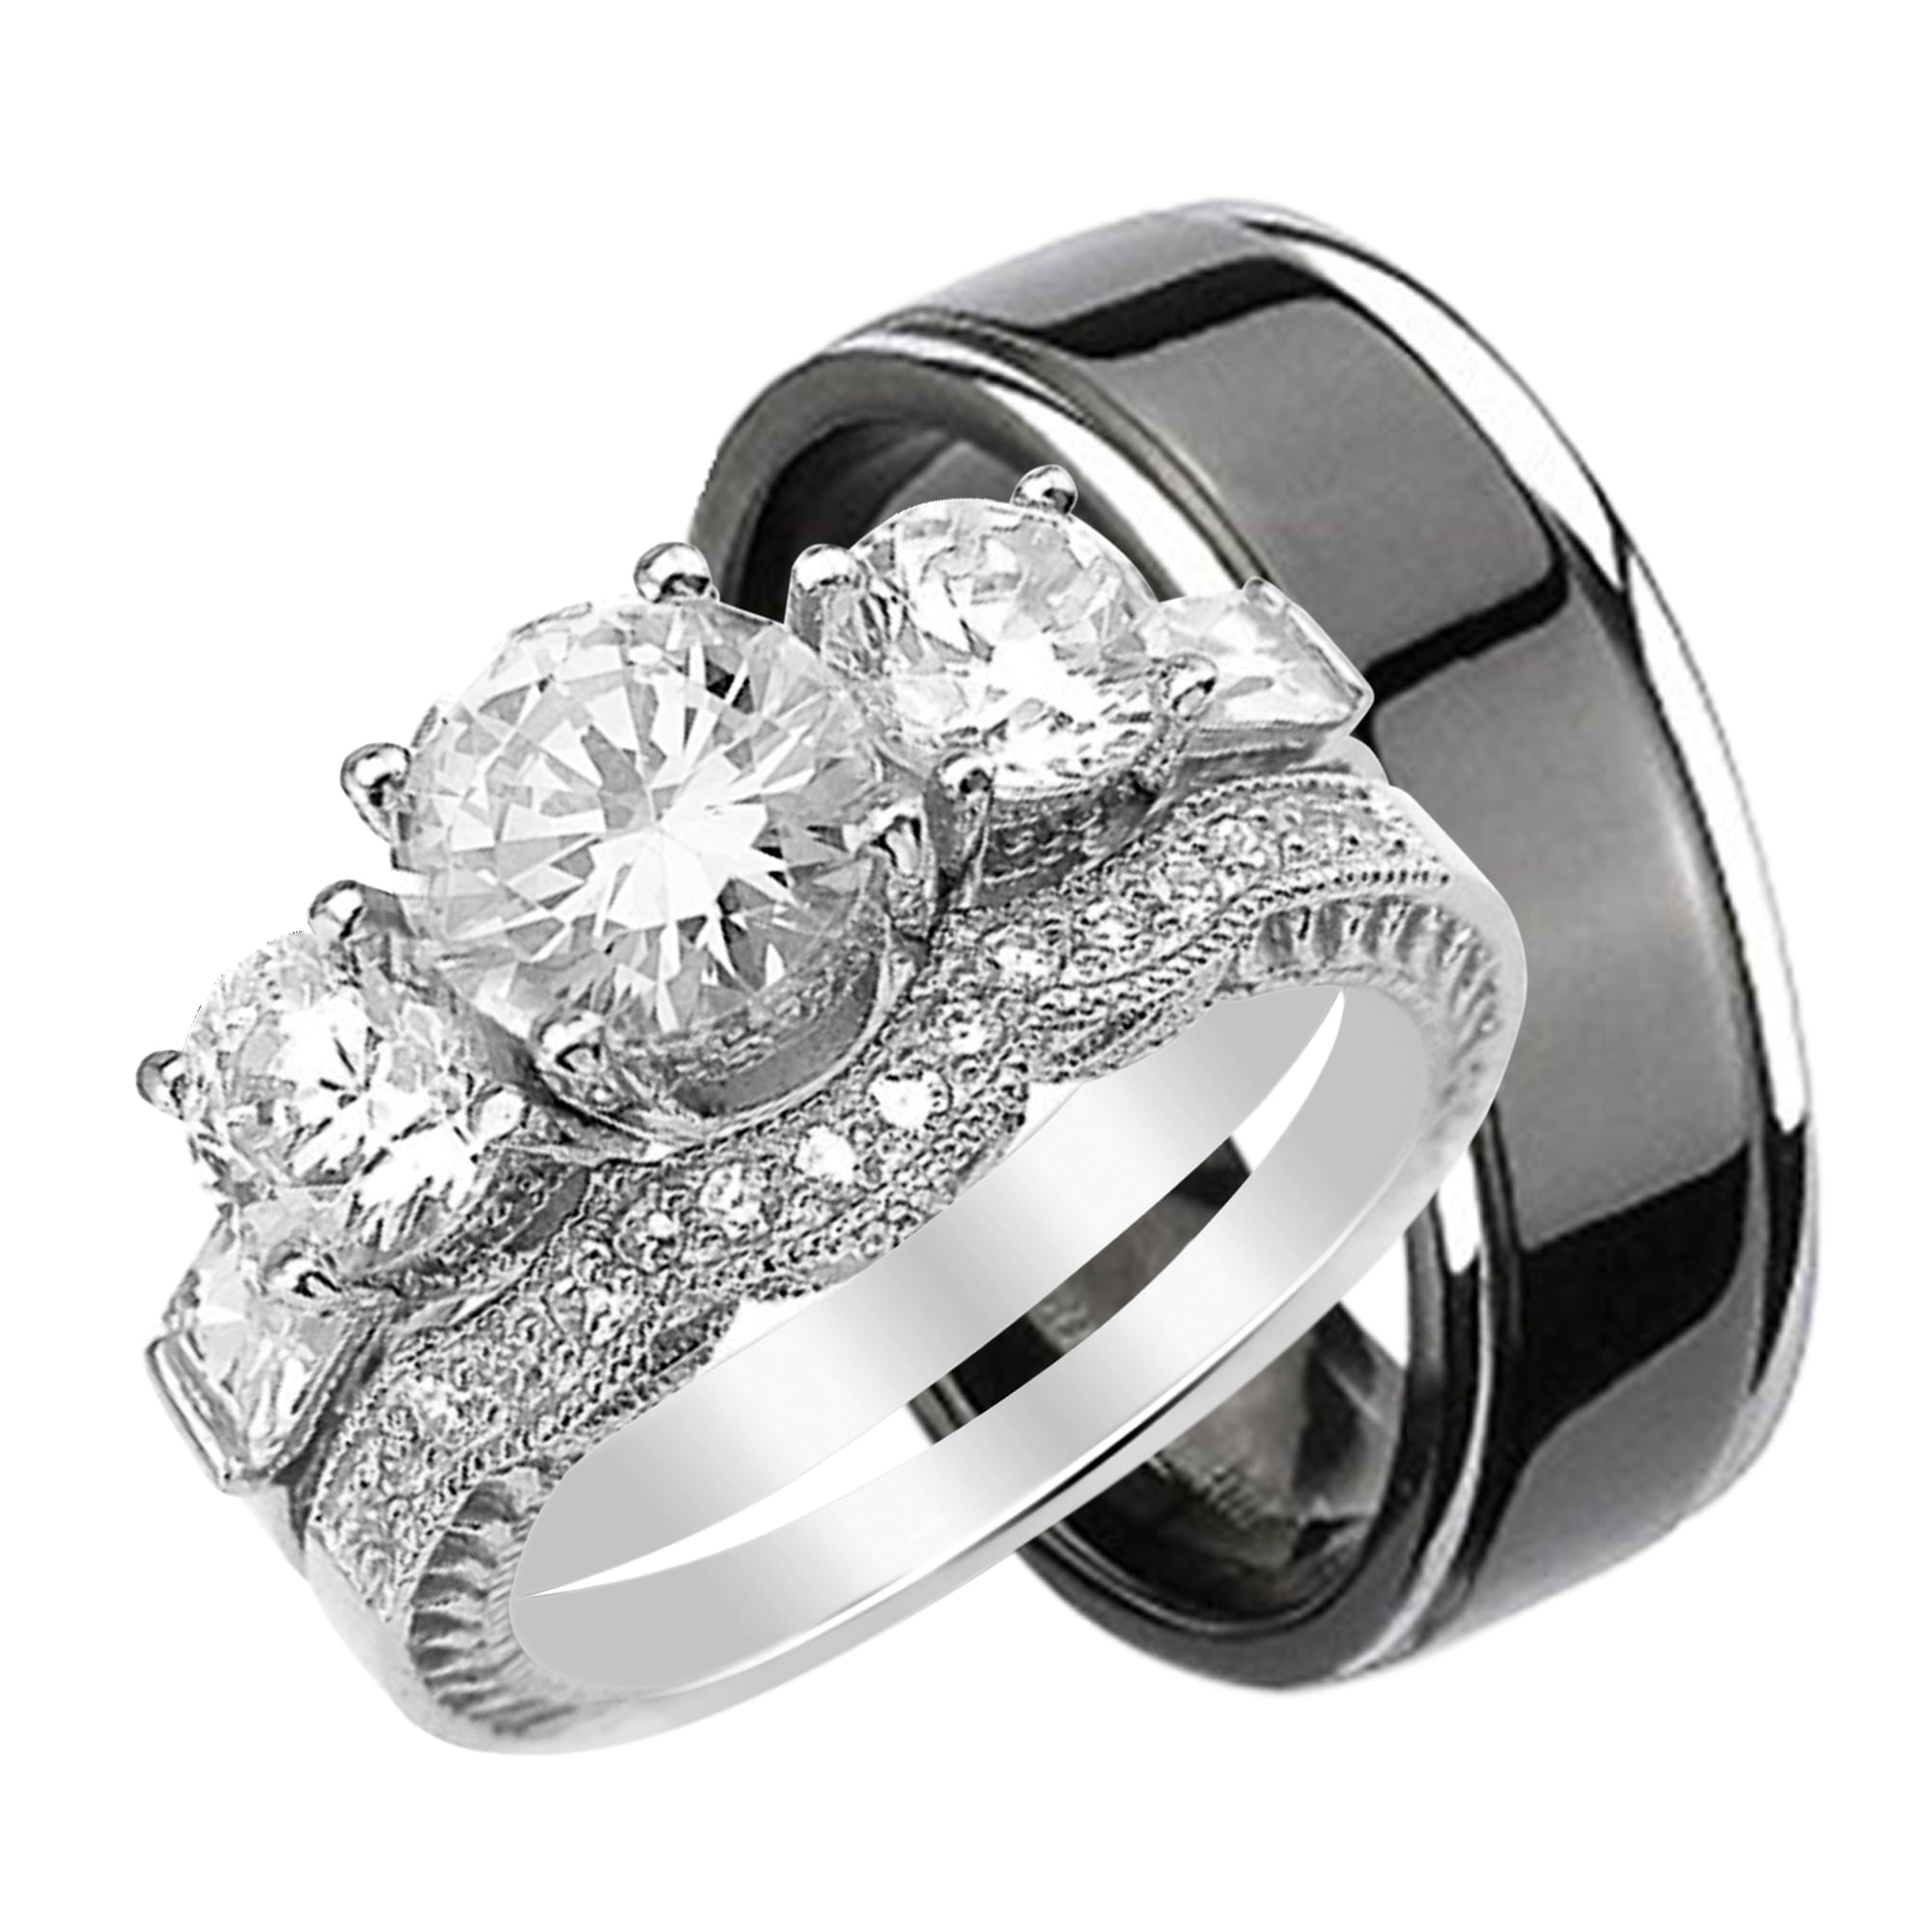 3 pcs His and Hers Wedding Engagement Rings CZ 925 STERLING SILVER Titanium SET 